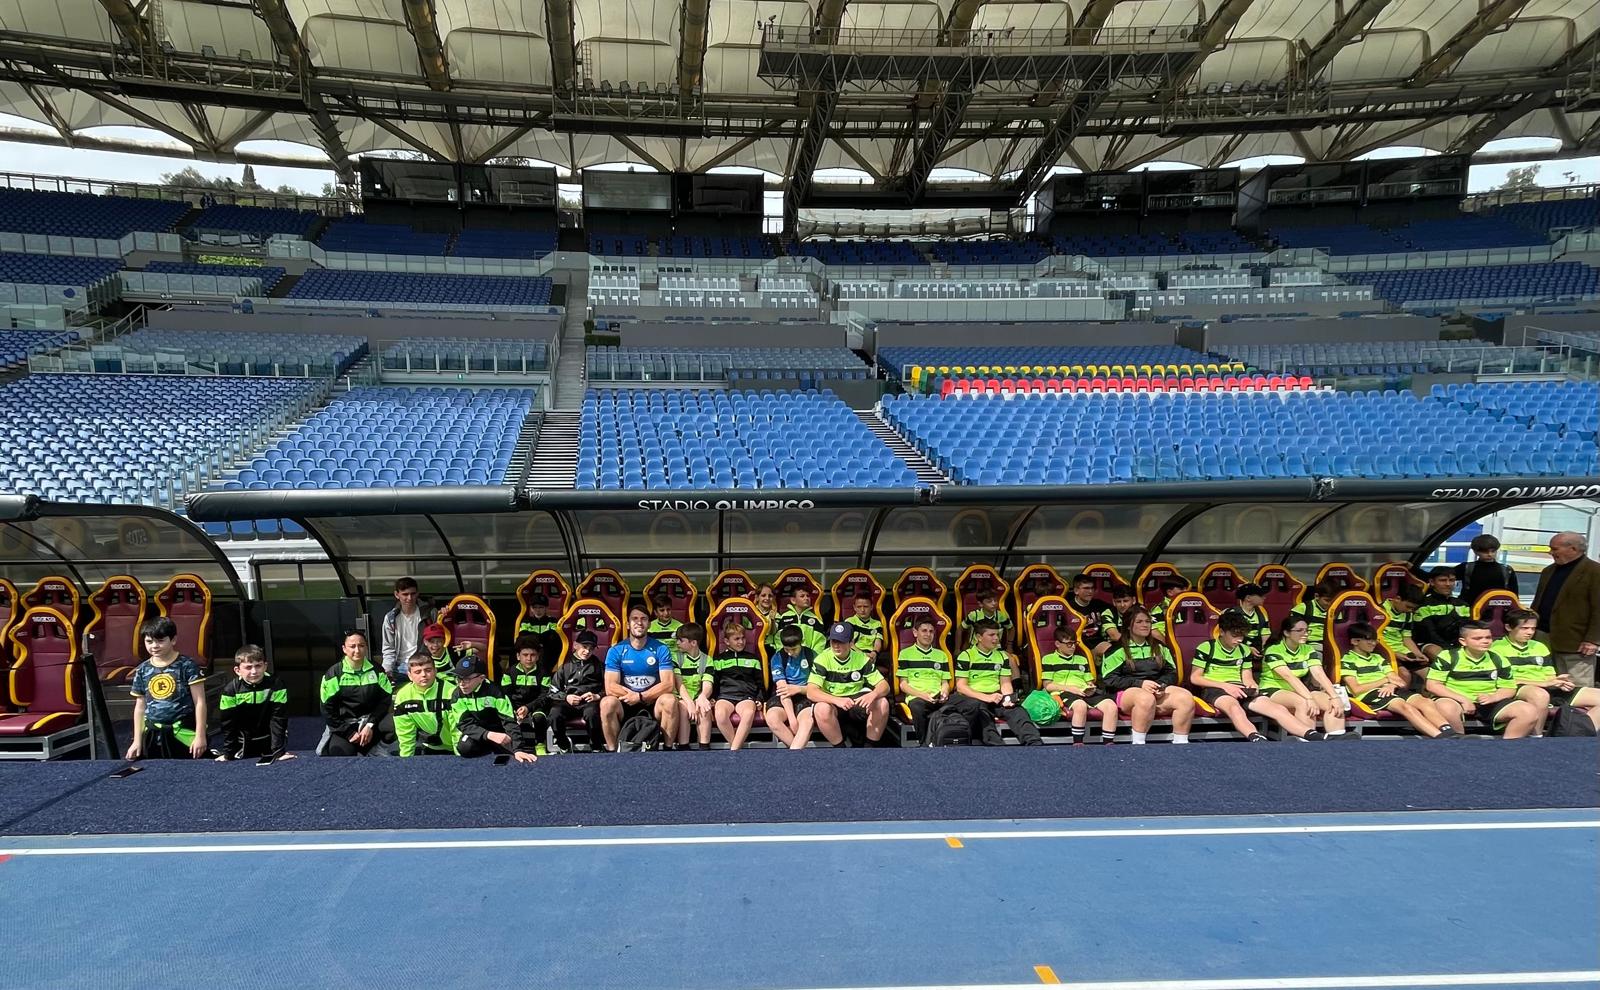 Us Acli, football schools visiting the Olimpico: tour for around 200 children